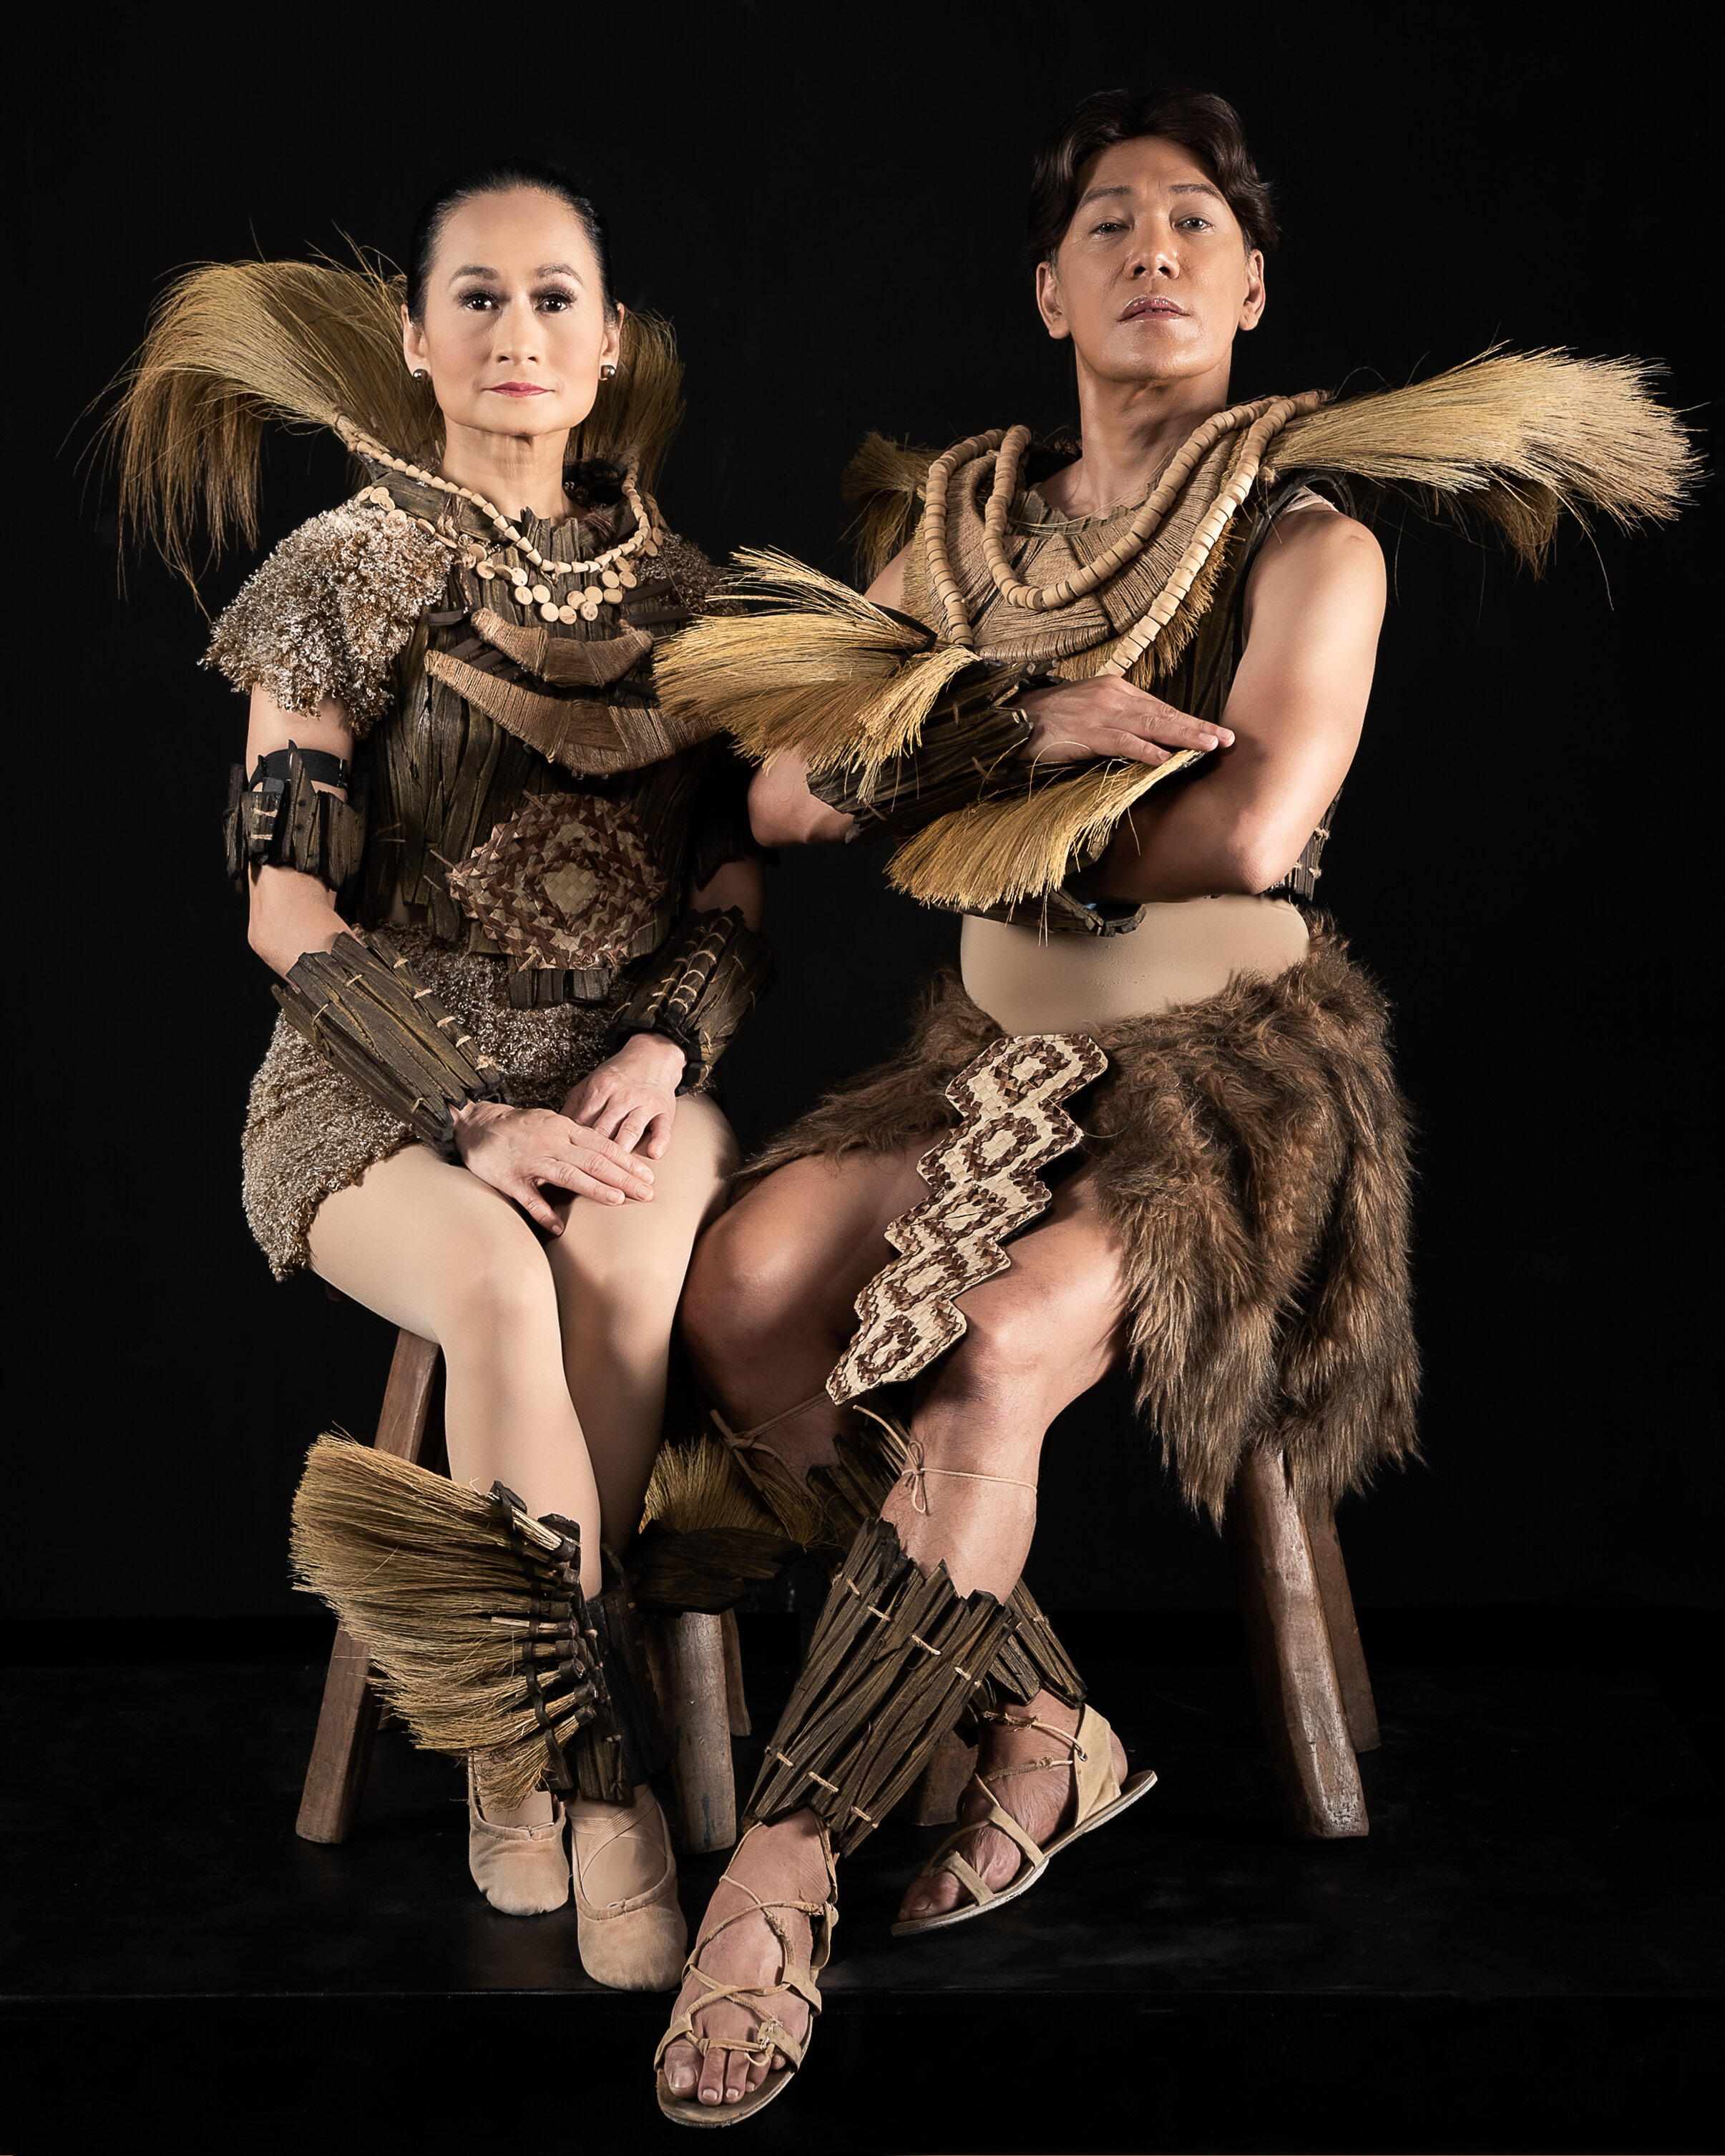  The kingdom of Berbanya is ruled by Haring Fernando (Osias Barroso), with the queen Donya Valeriana (Lisa Macuja-Elizalde) by his side.&nbsp; Photo courtesy of MarBi Photography and Project Art, Inc. 